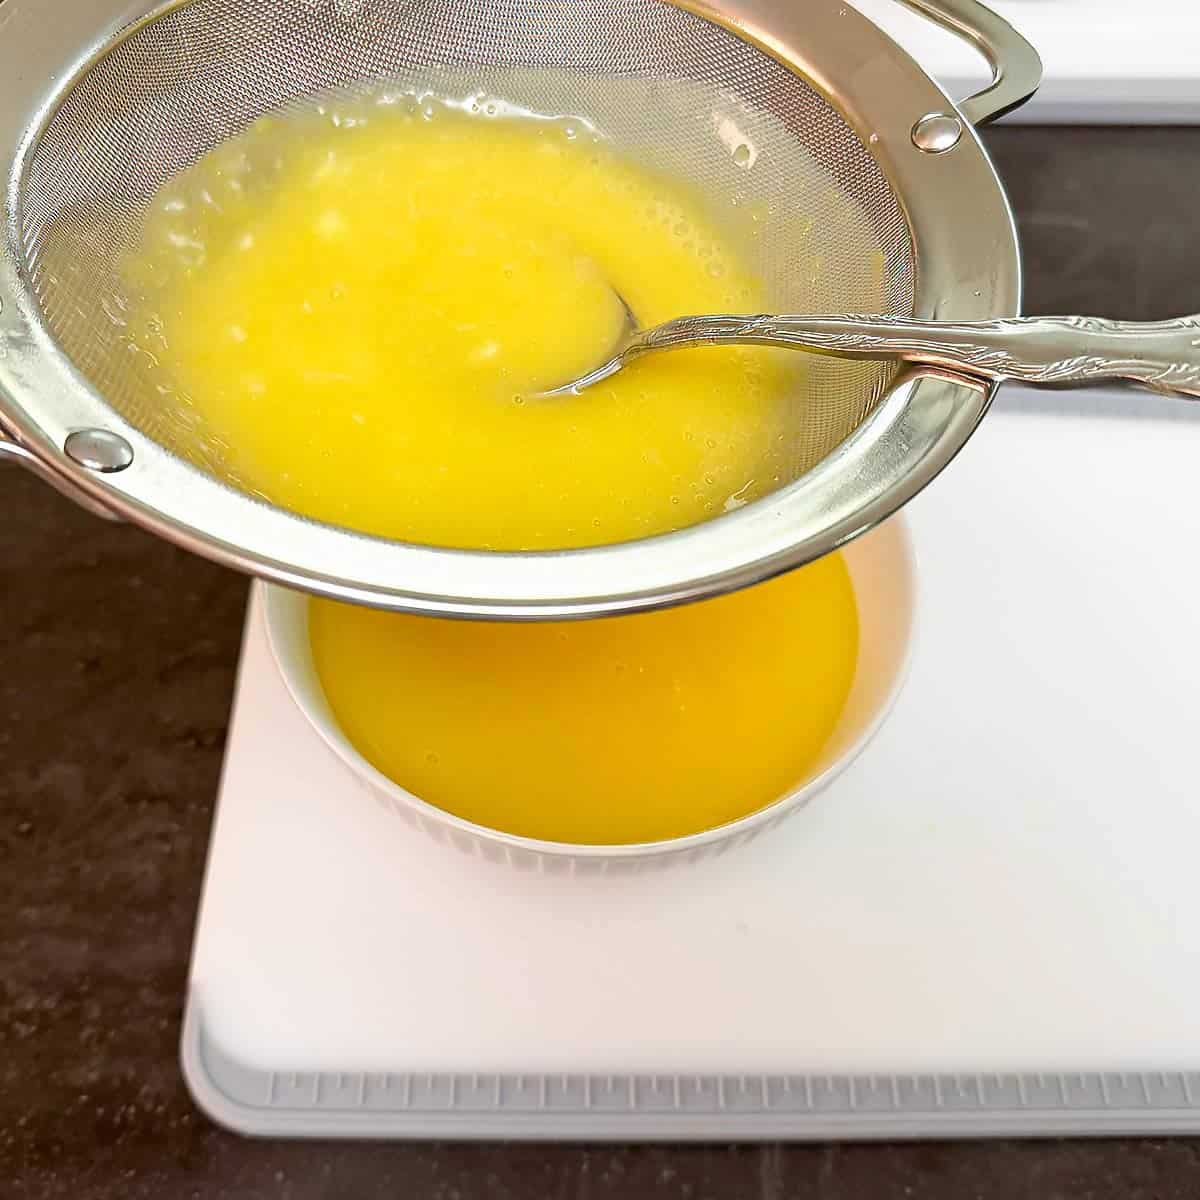 Strain the cooked lemon curd into a bowl.